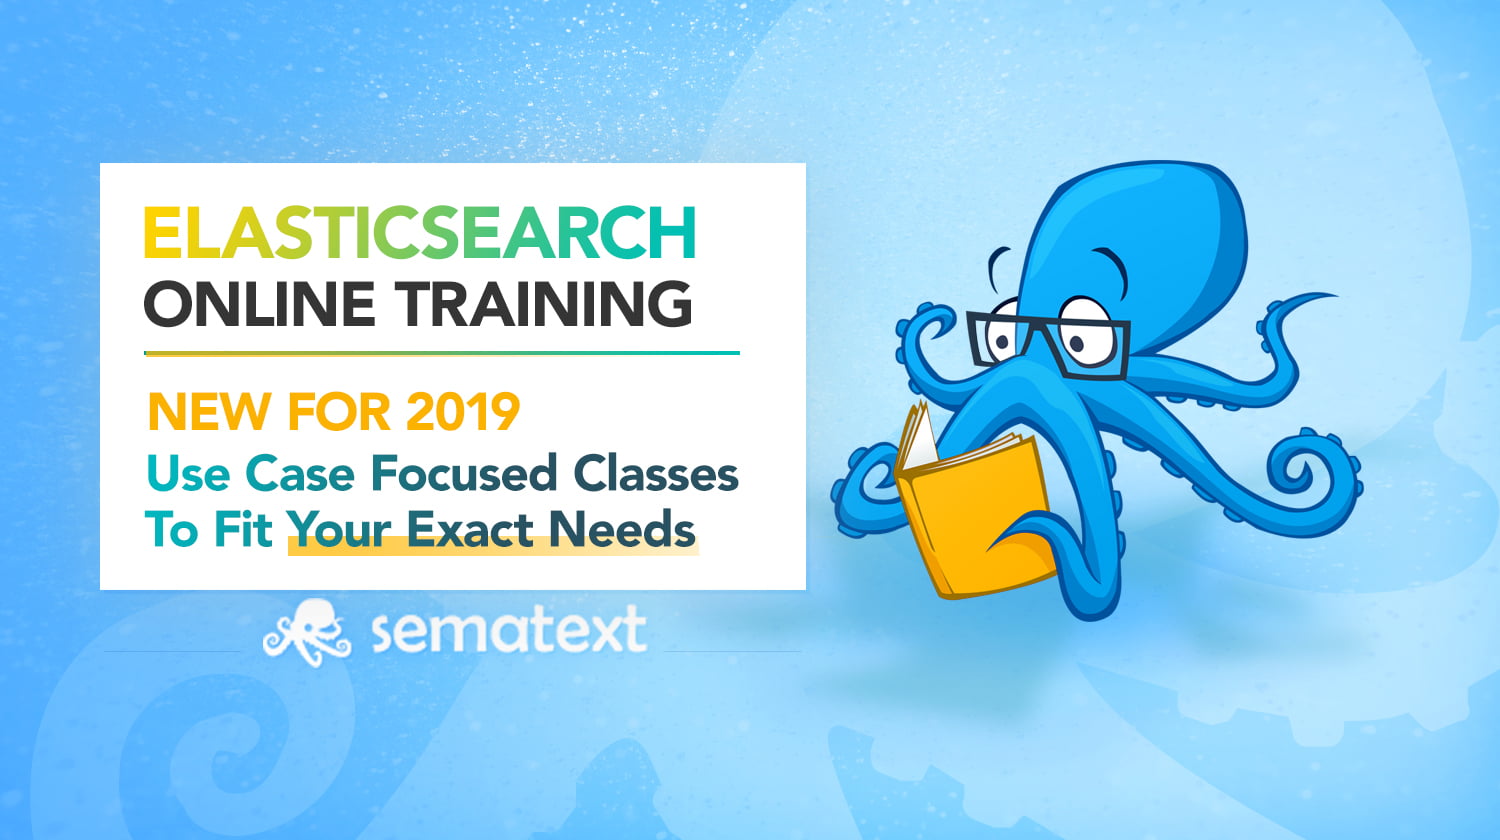 Use Case Focused Elasticsearch Online Training Classes to Fit Your Exact Needs